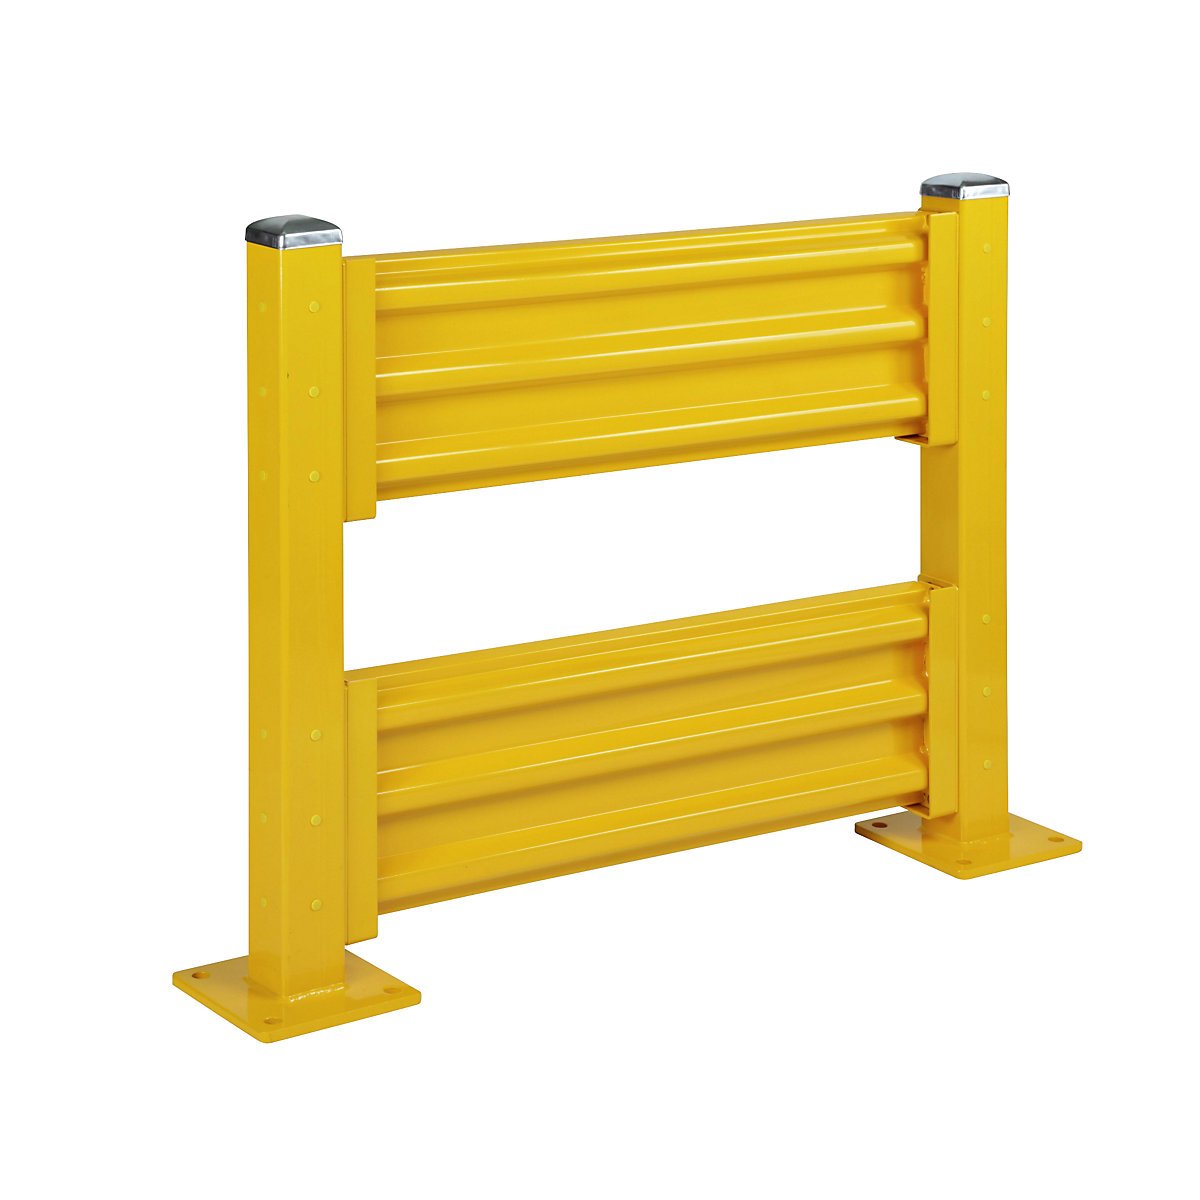 Crash protection wall, height 1090 mm, 2 wall sections, length 1067 mm, standard section incl. 2 posts